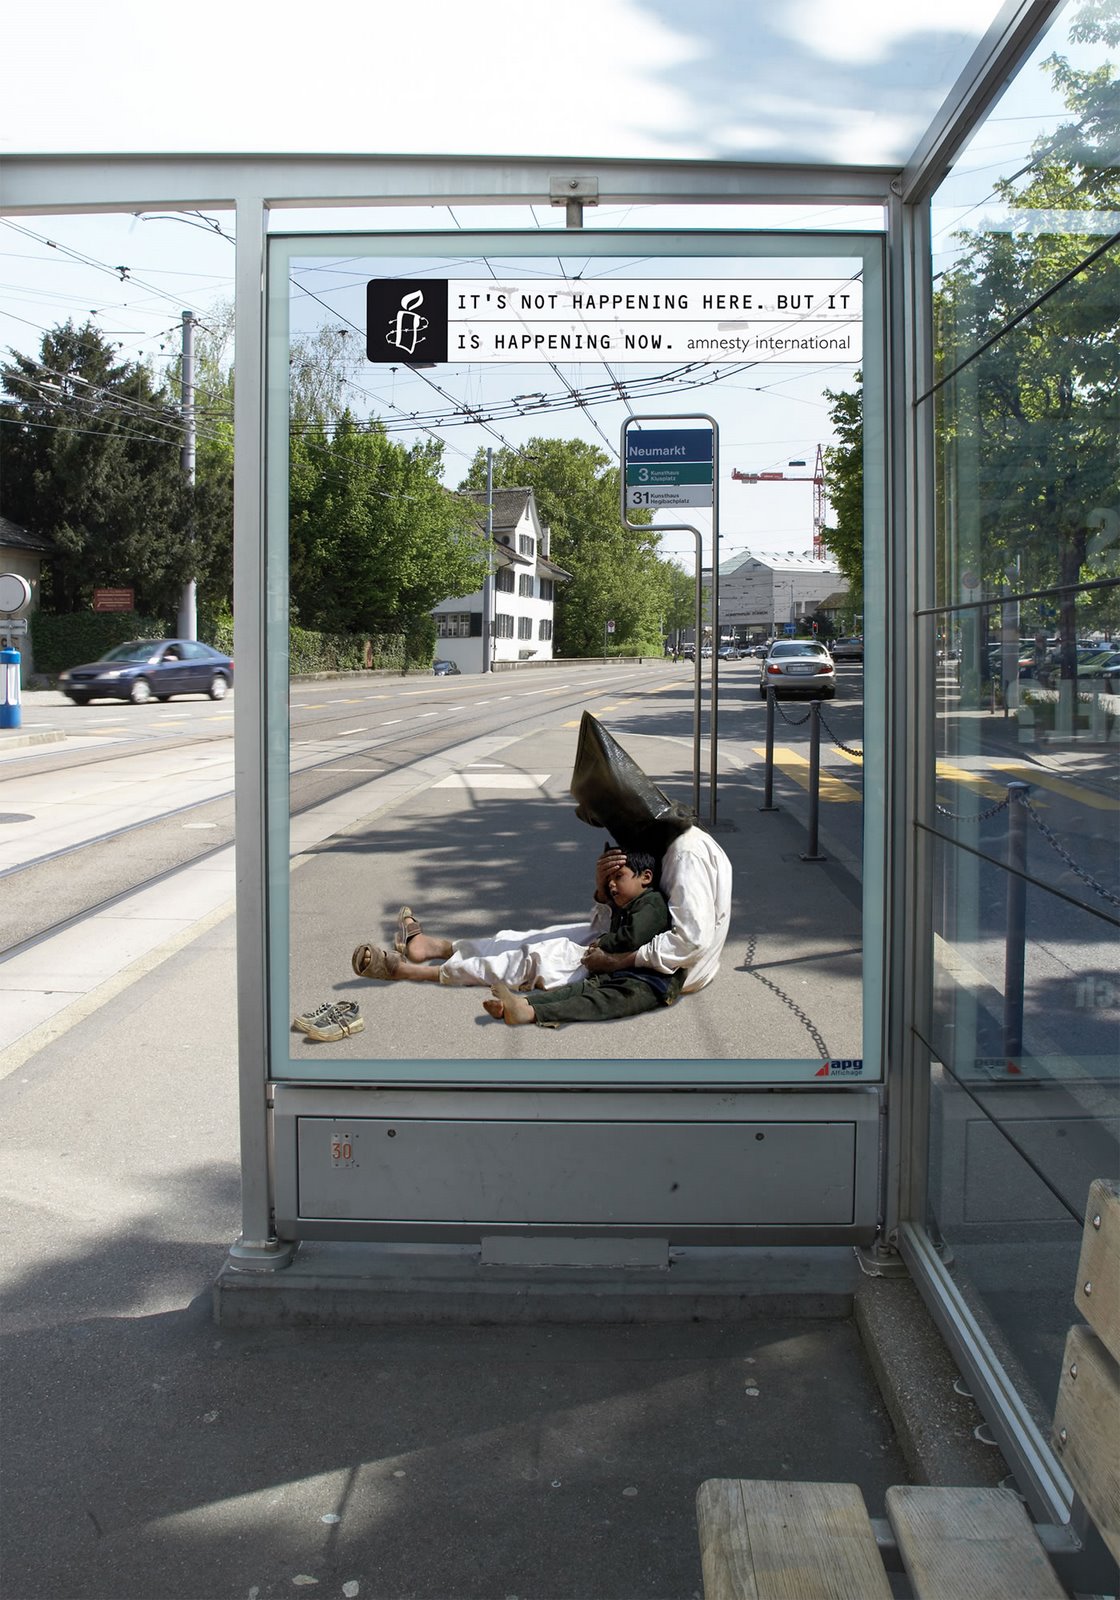 its not happening here – poster campaign